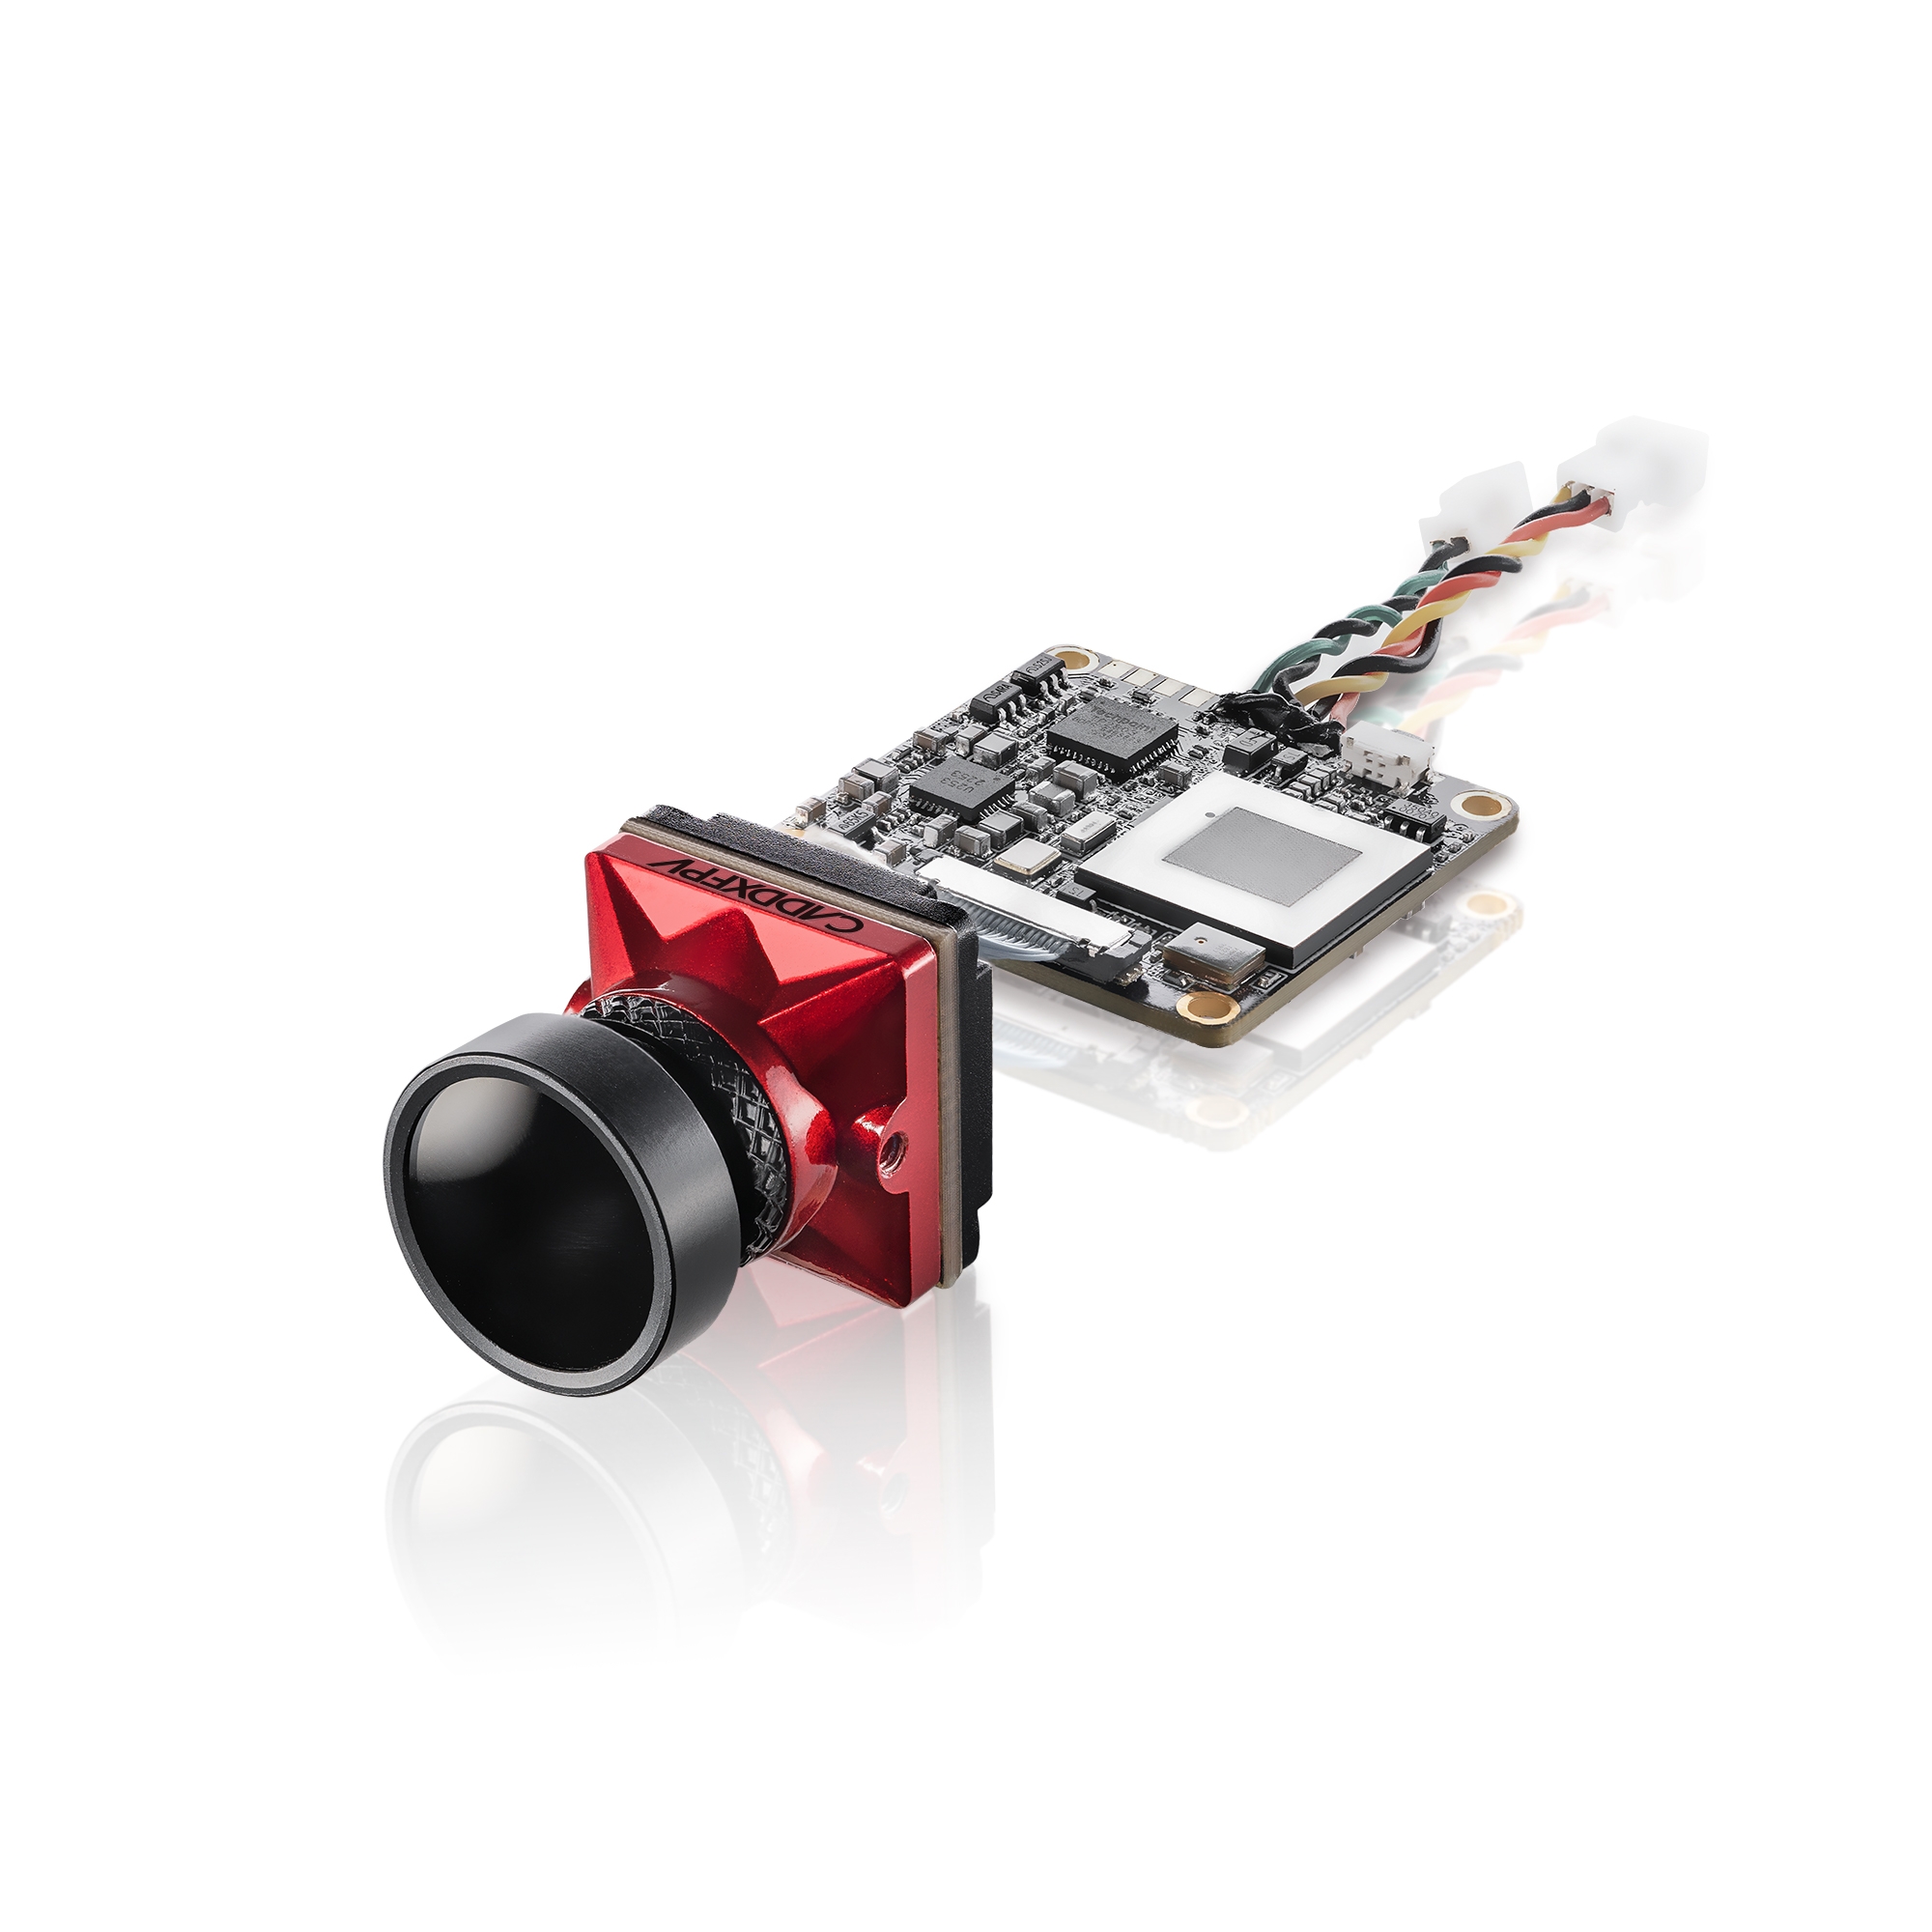 Caddx Loris Micro 2.1mm 800TVL 4K/60fps HD 160°FOV FPV Camera 16g Micro Size with ND Filter for FPV Racing RC Drone